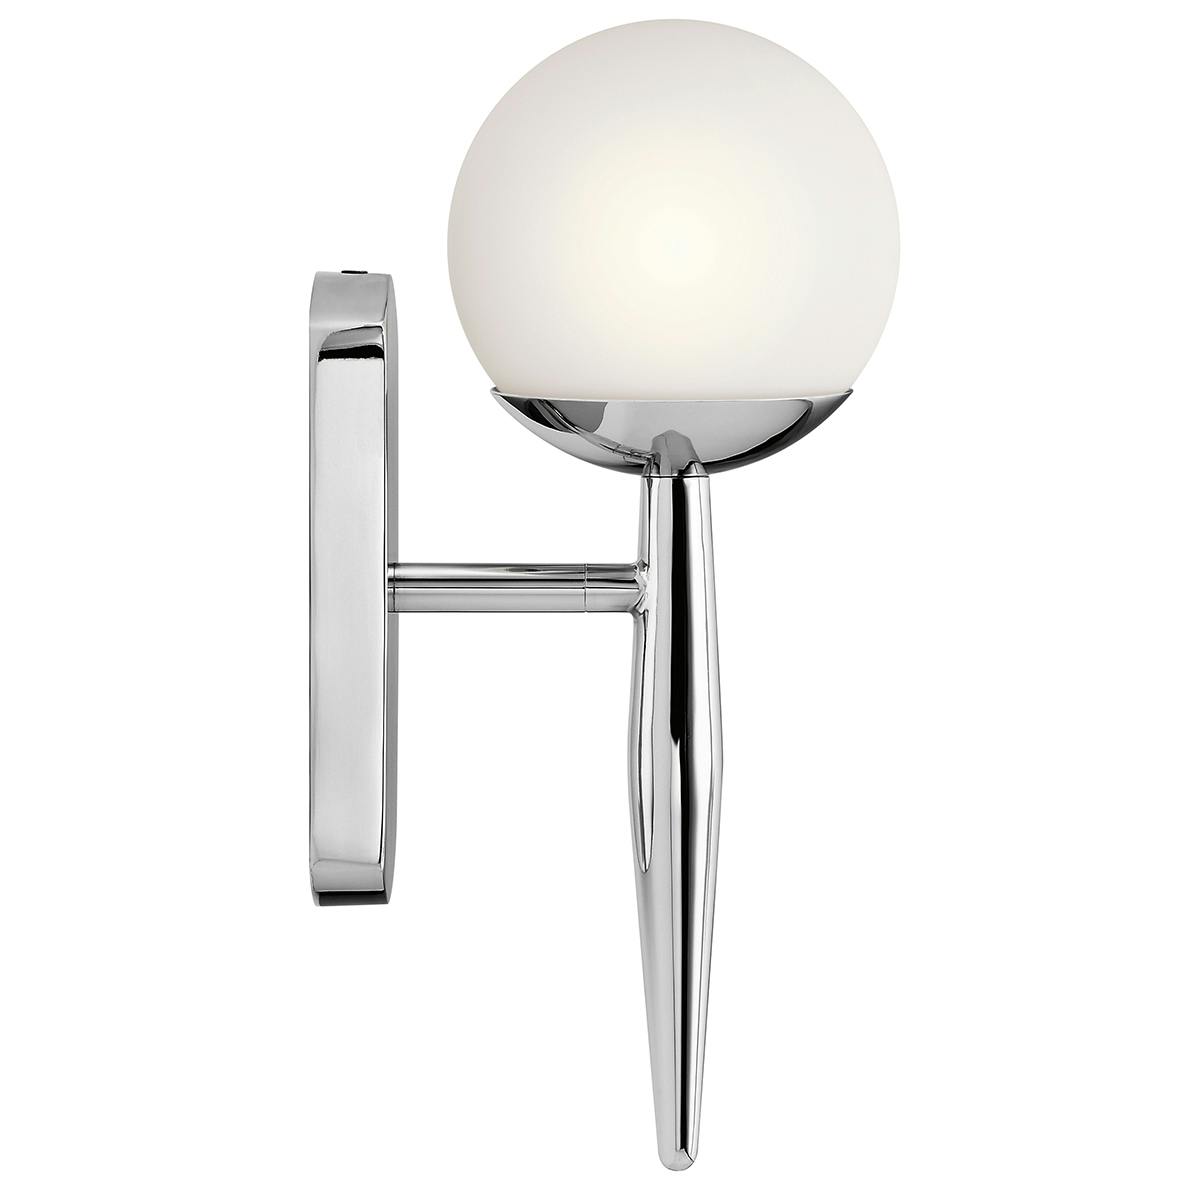 Profile view of the Jasper 1 Light Halogen Wall Sconce Chrome on a white background